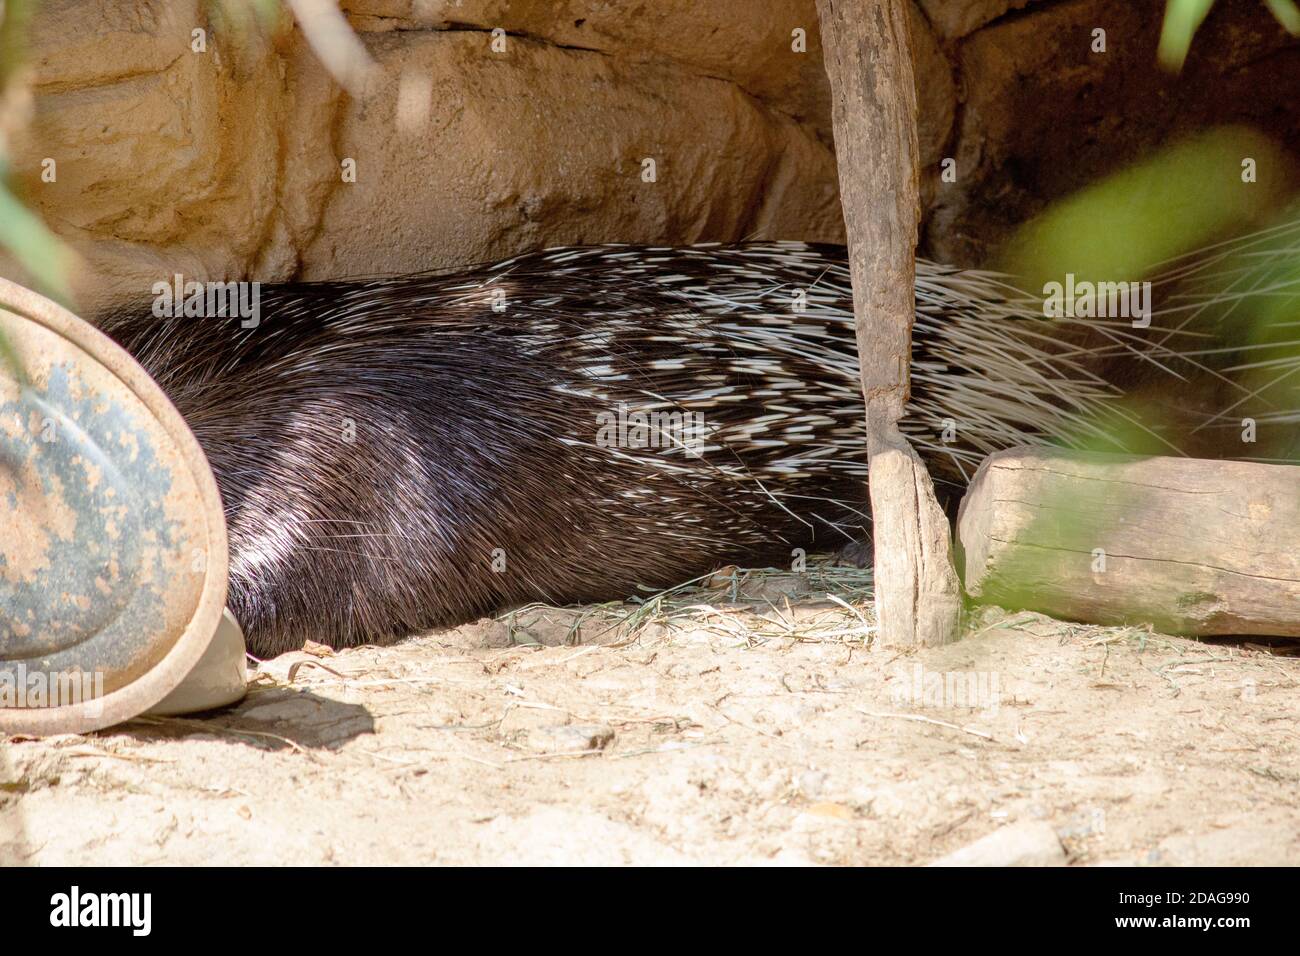 The Indian crested porcupine, Hystrix indica, is a hystricomorph rodent species native to southern Asia and the Middle East. Stock Photo